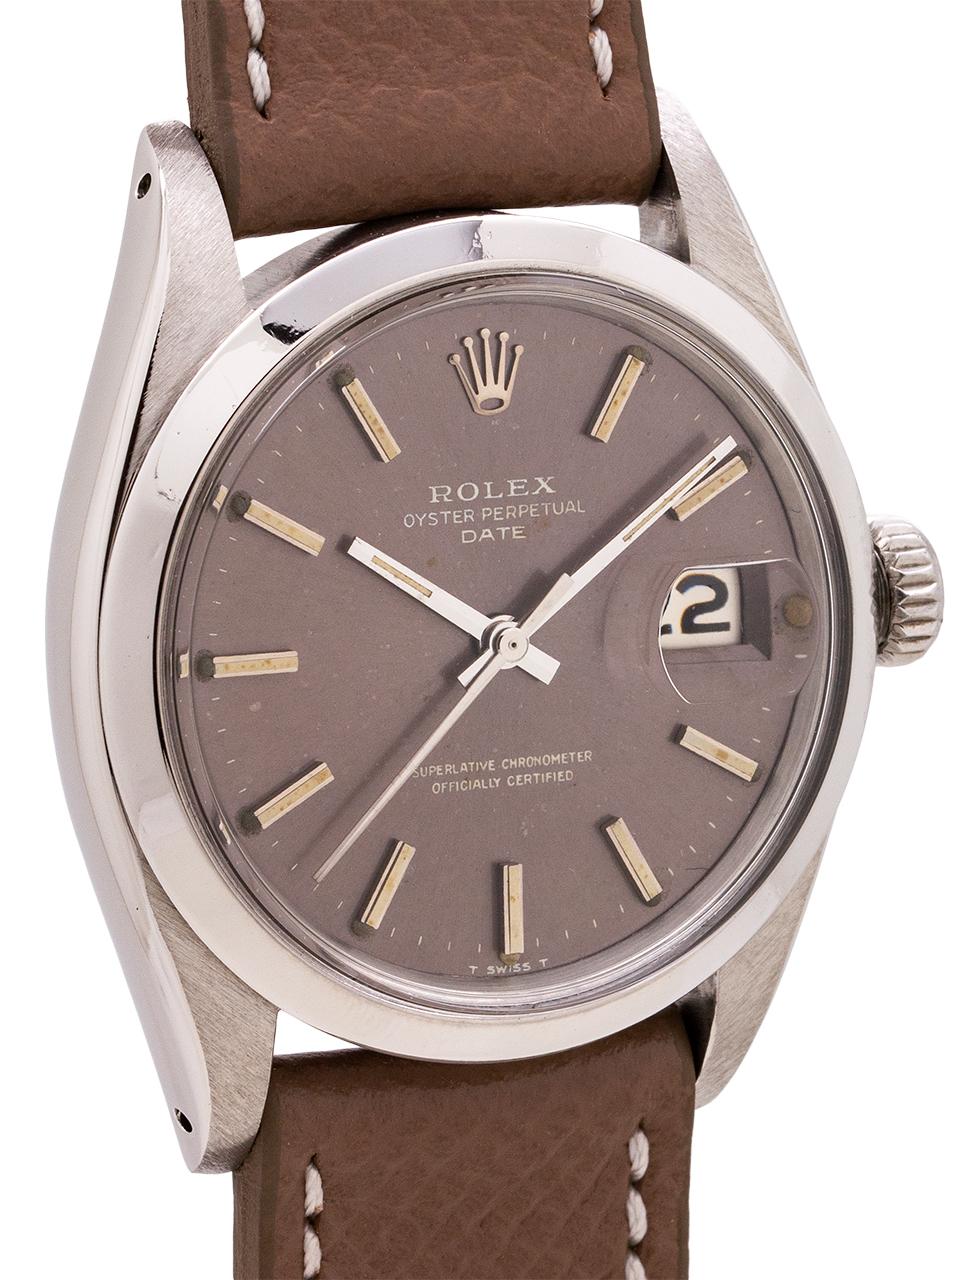 
Rolex Oyster Perpetual Date ref 1500 circa 1969. Featuring 34mm diameter case with smooth bezel, acrylic crystal, and original taupe grey dial with applied silver indexes and silver baton hands. The tritium in the hands and makers have aged to a